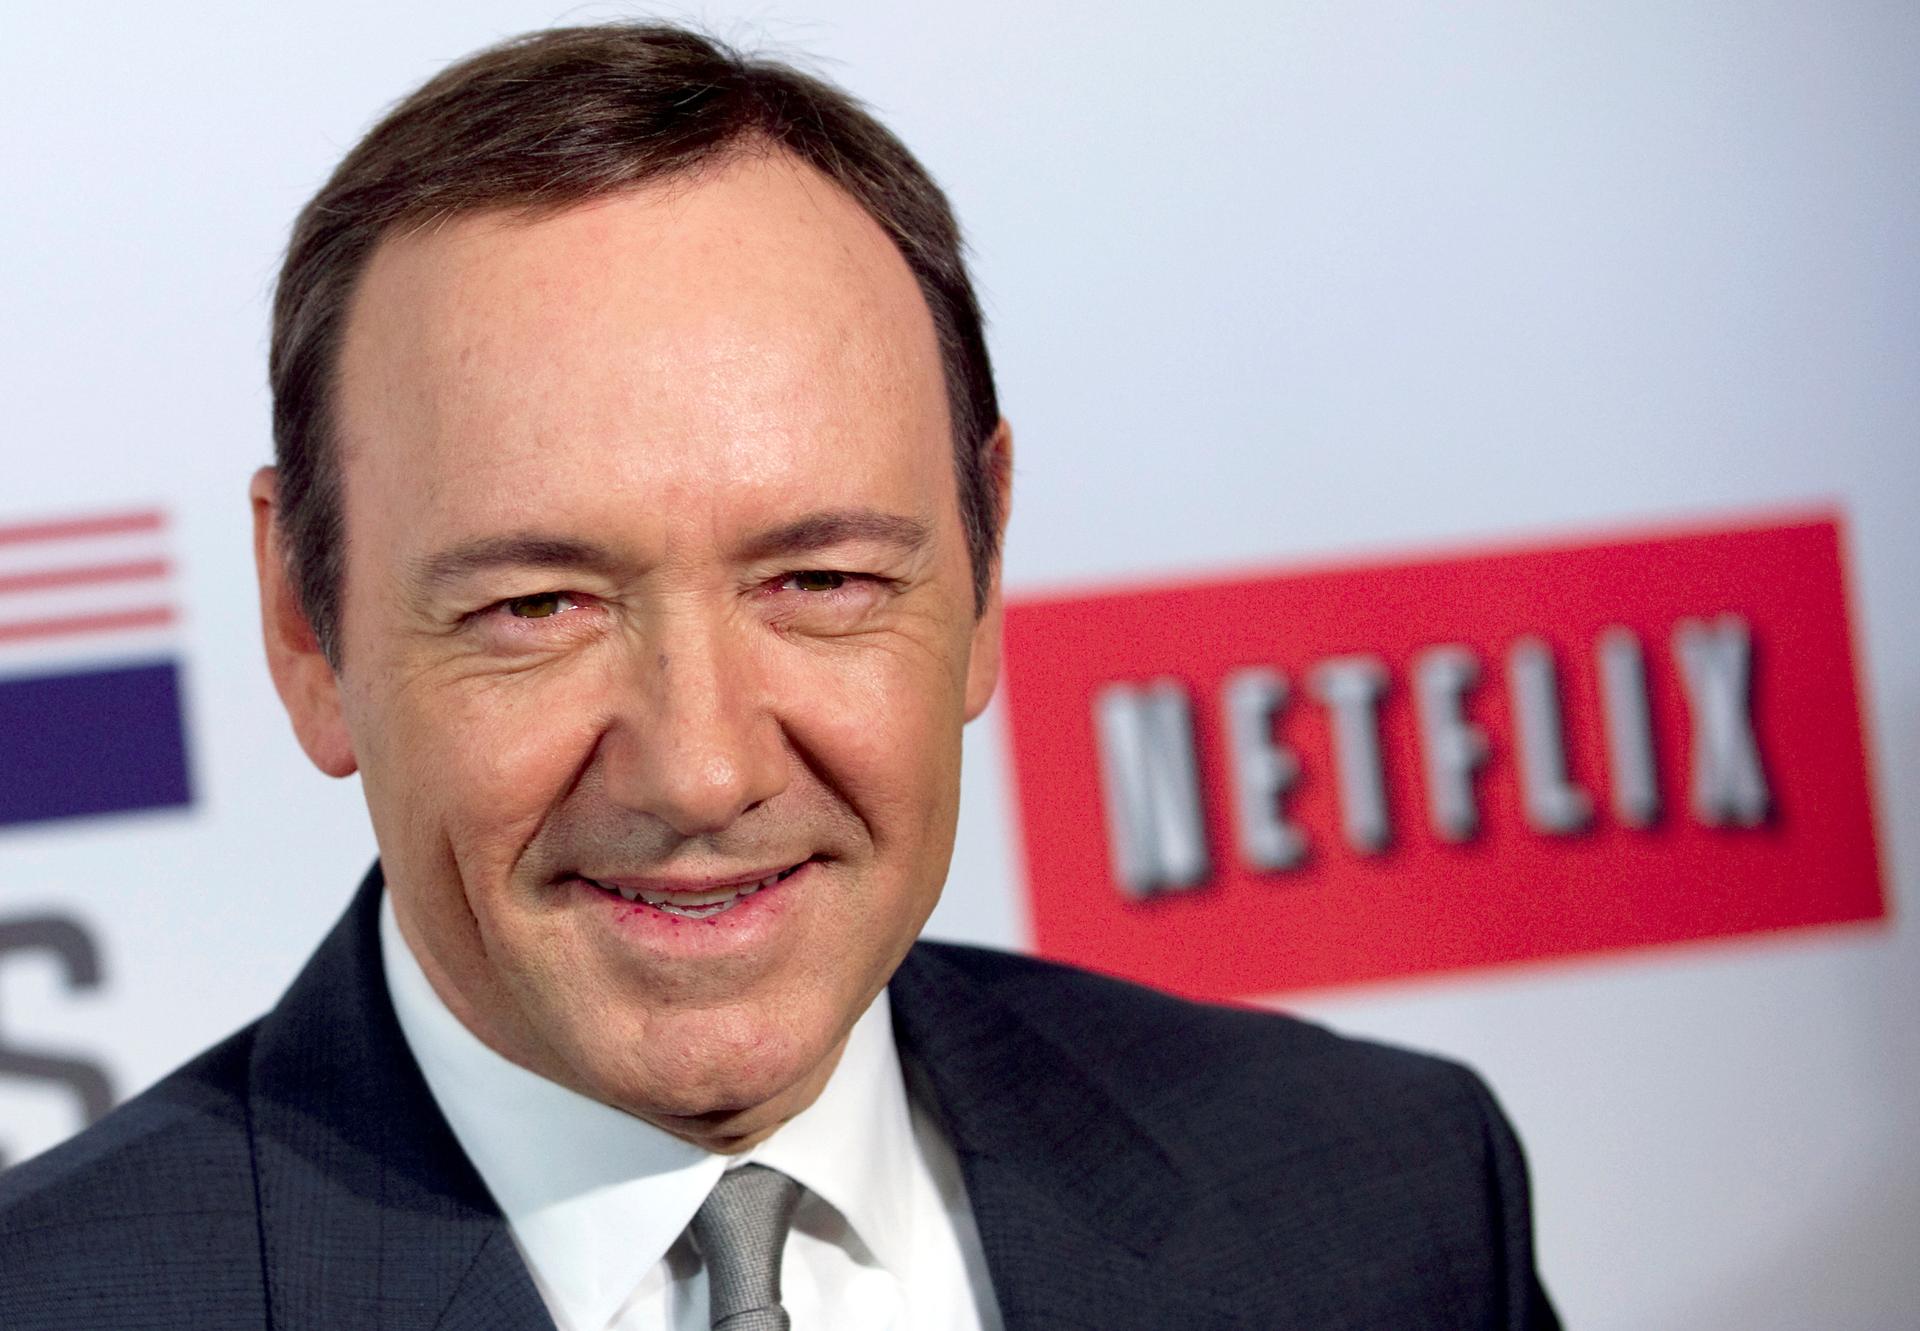 Actor Kevin Spacey at the premiere of Netflix's television series "House of Cards" at Alice Tully Hall in the Lincoln Center